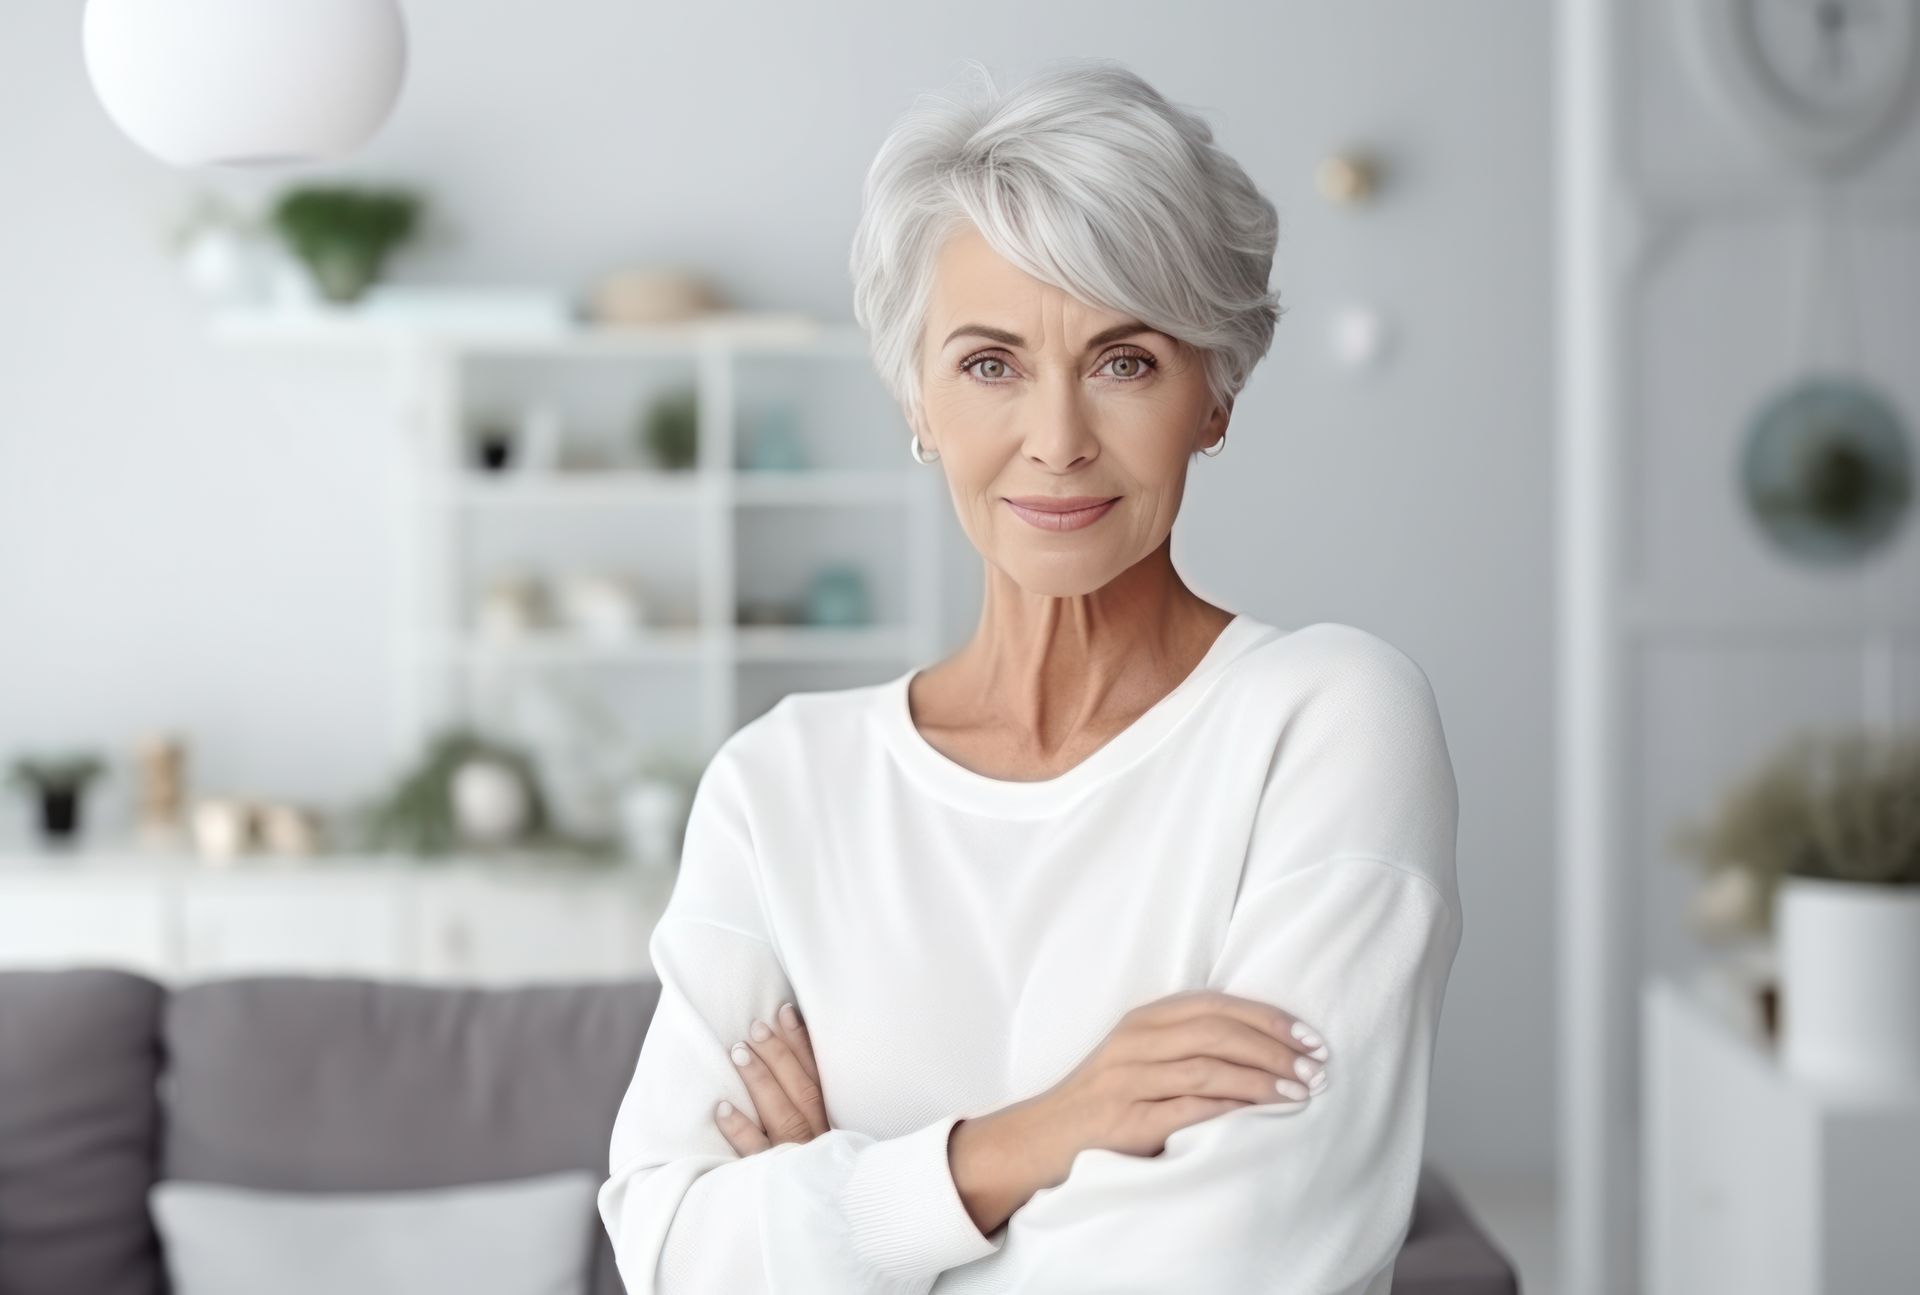 Pretty, gray-haired woman in white shirt standing with arms crossed